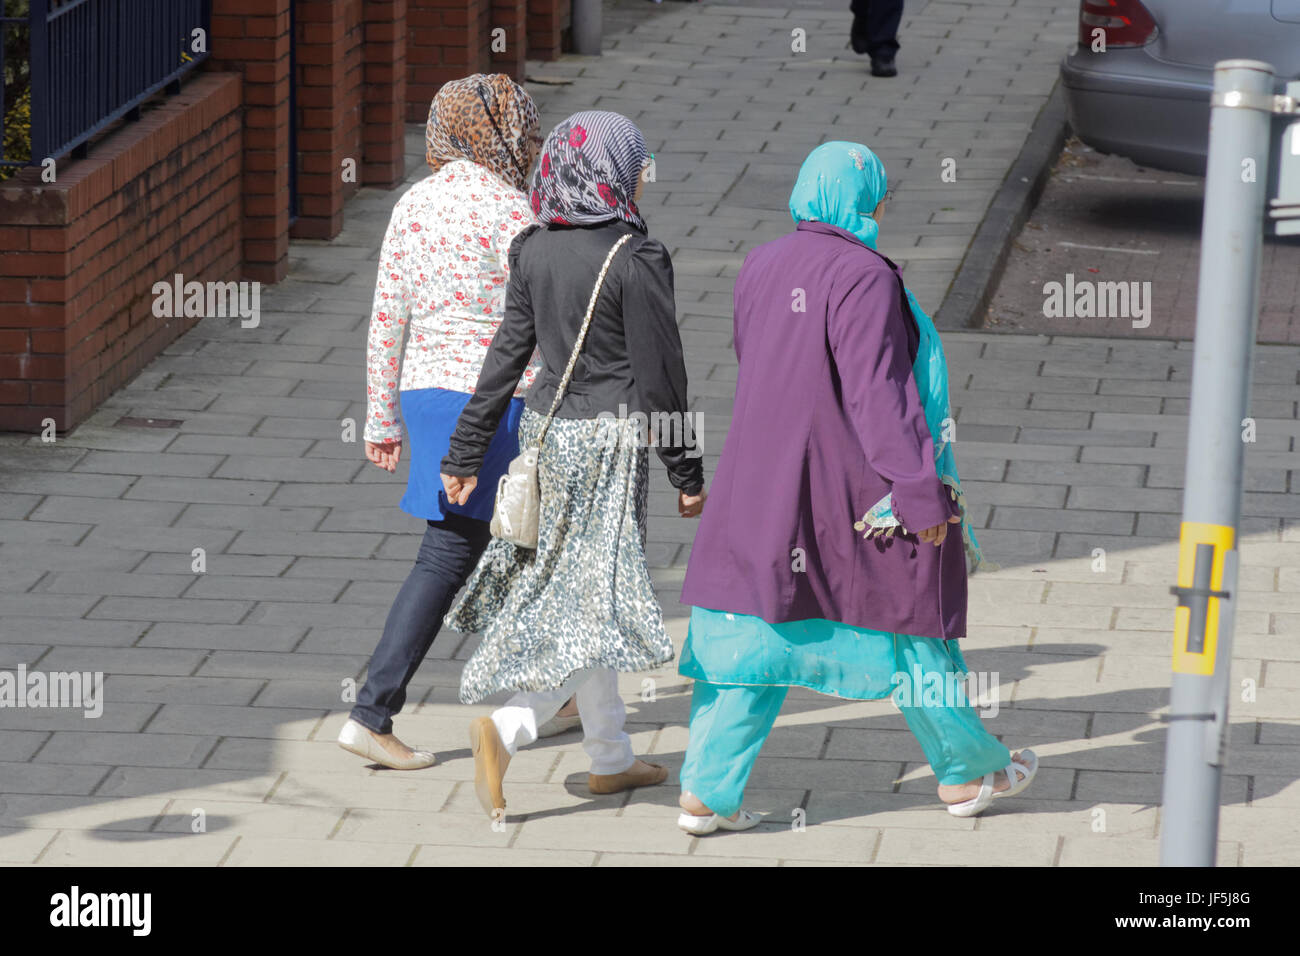 Asian family refugee dressed Hijab scarf on street in the UK everyday scene three  girls shopping Stock Photo